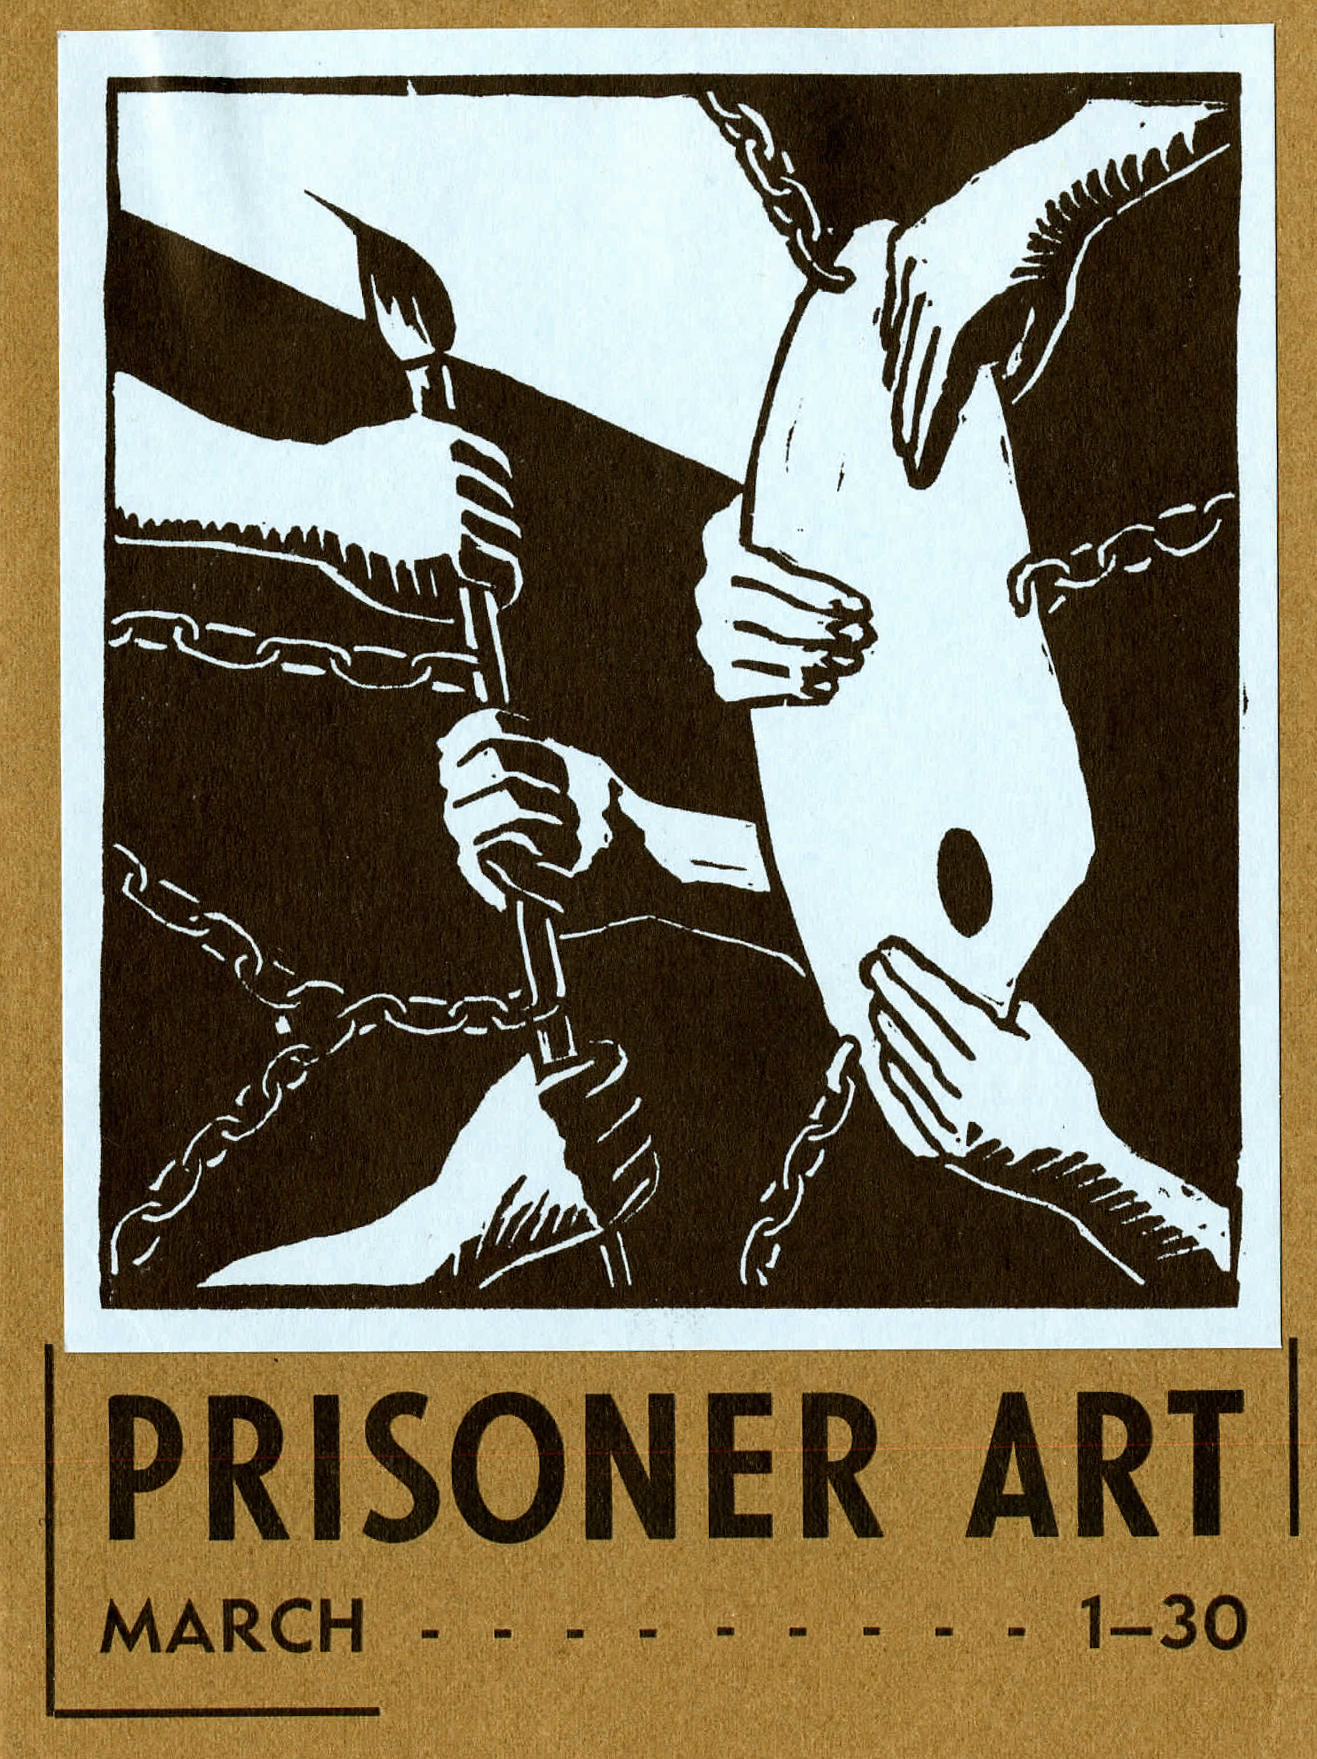 This is a brochure for the exhibit "Prisoner Art" which ran from March 1-30. The artwork shows 6 hands holding paintbrush and easel, yet bound by chains. 